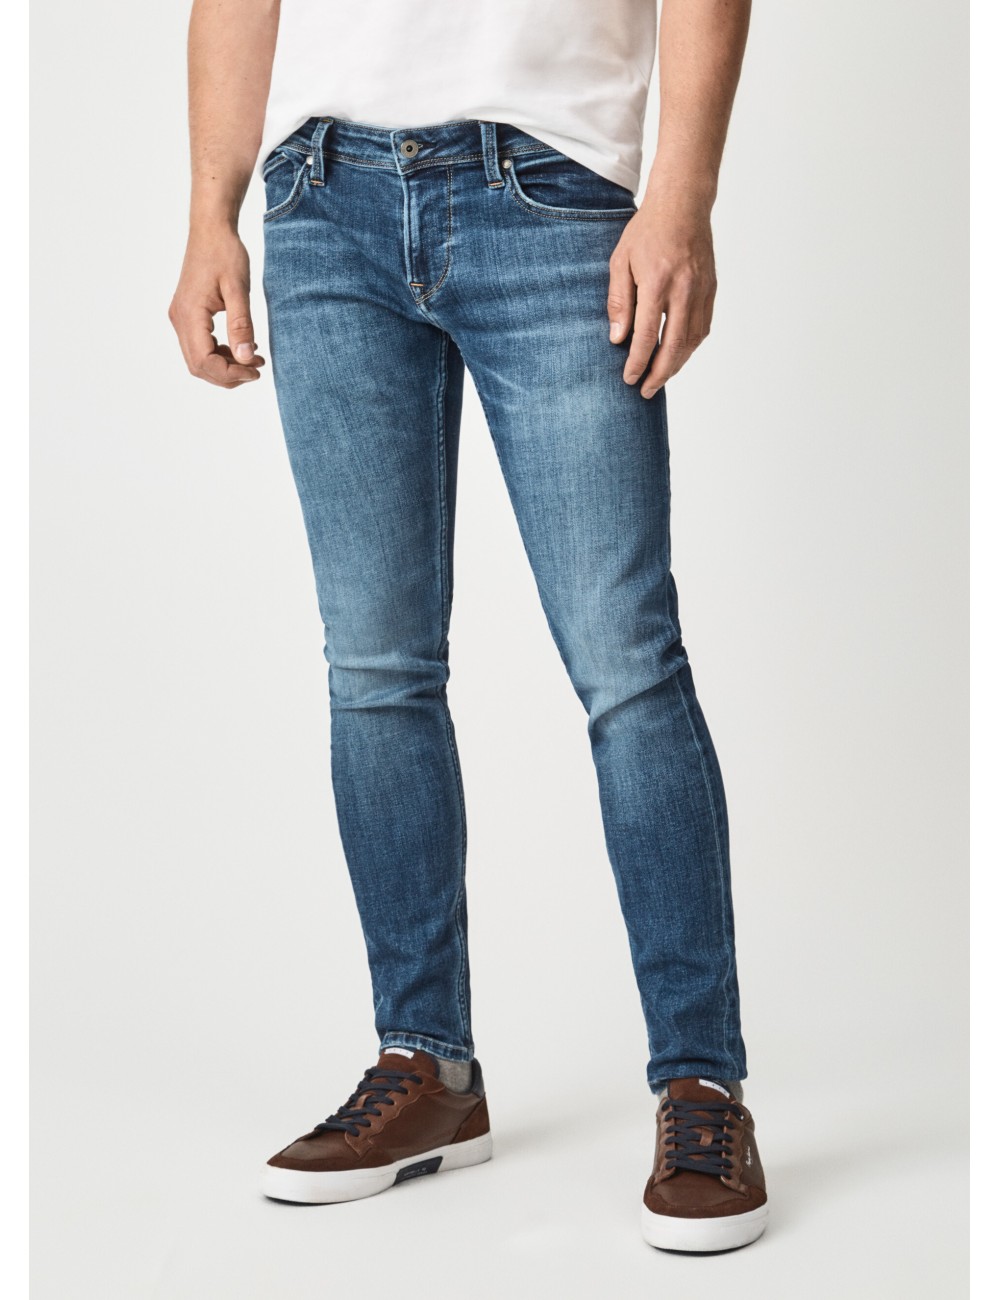 Pepe Jeans Finsbury Jeans para Hombre 